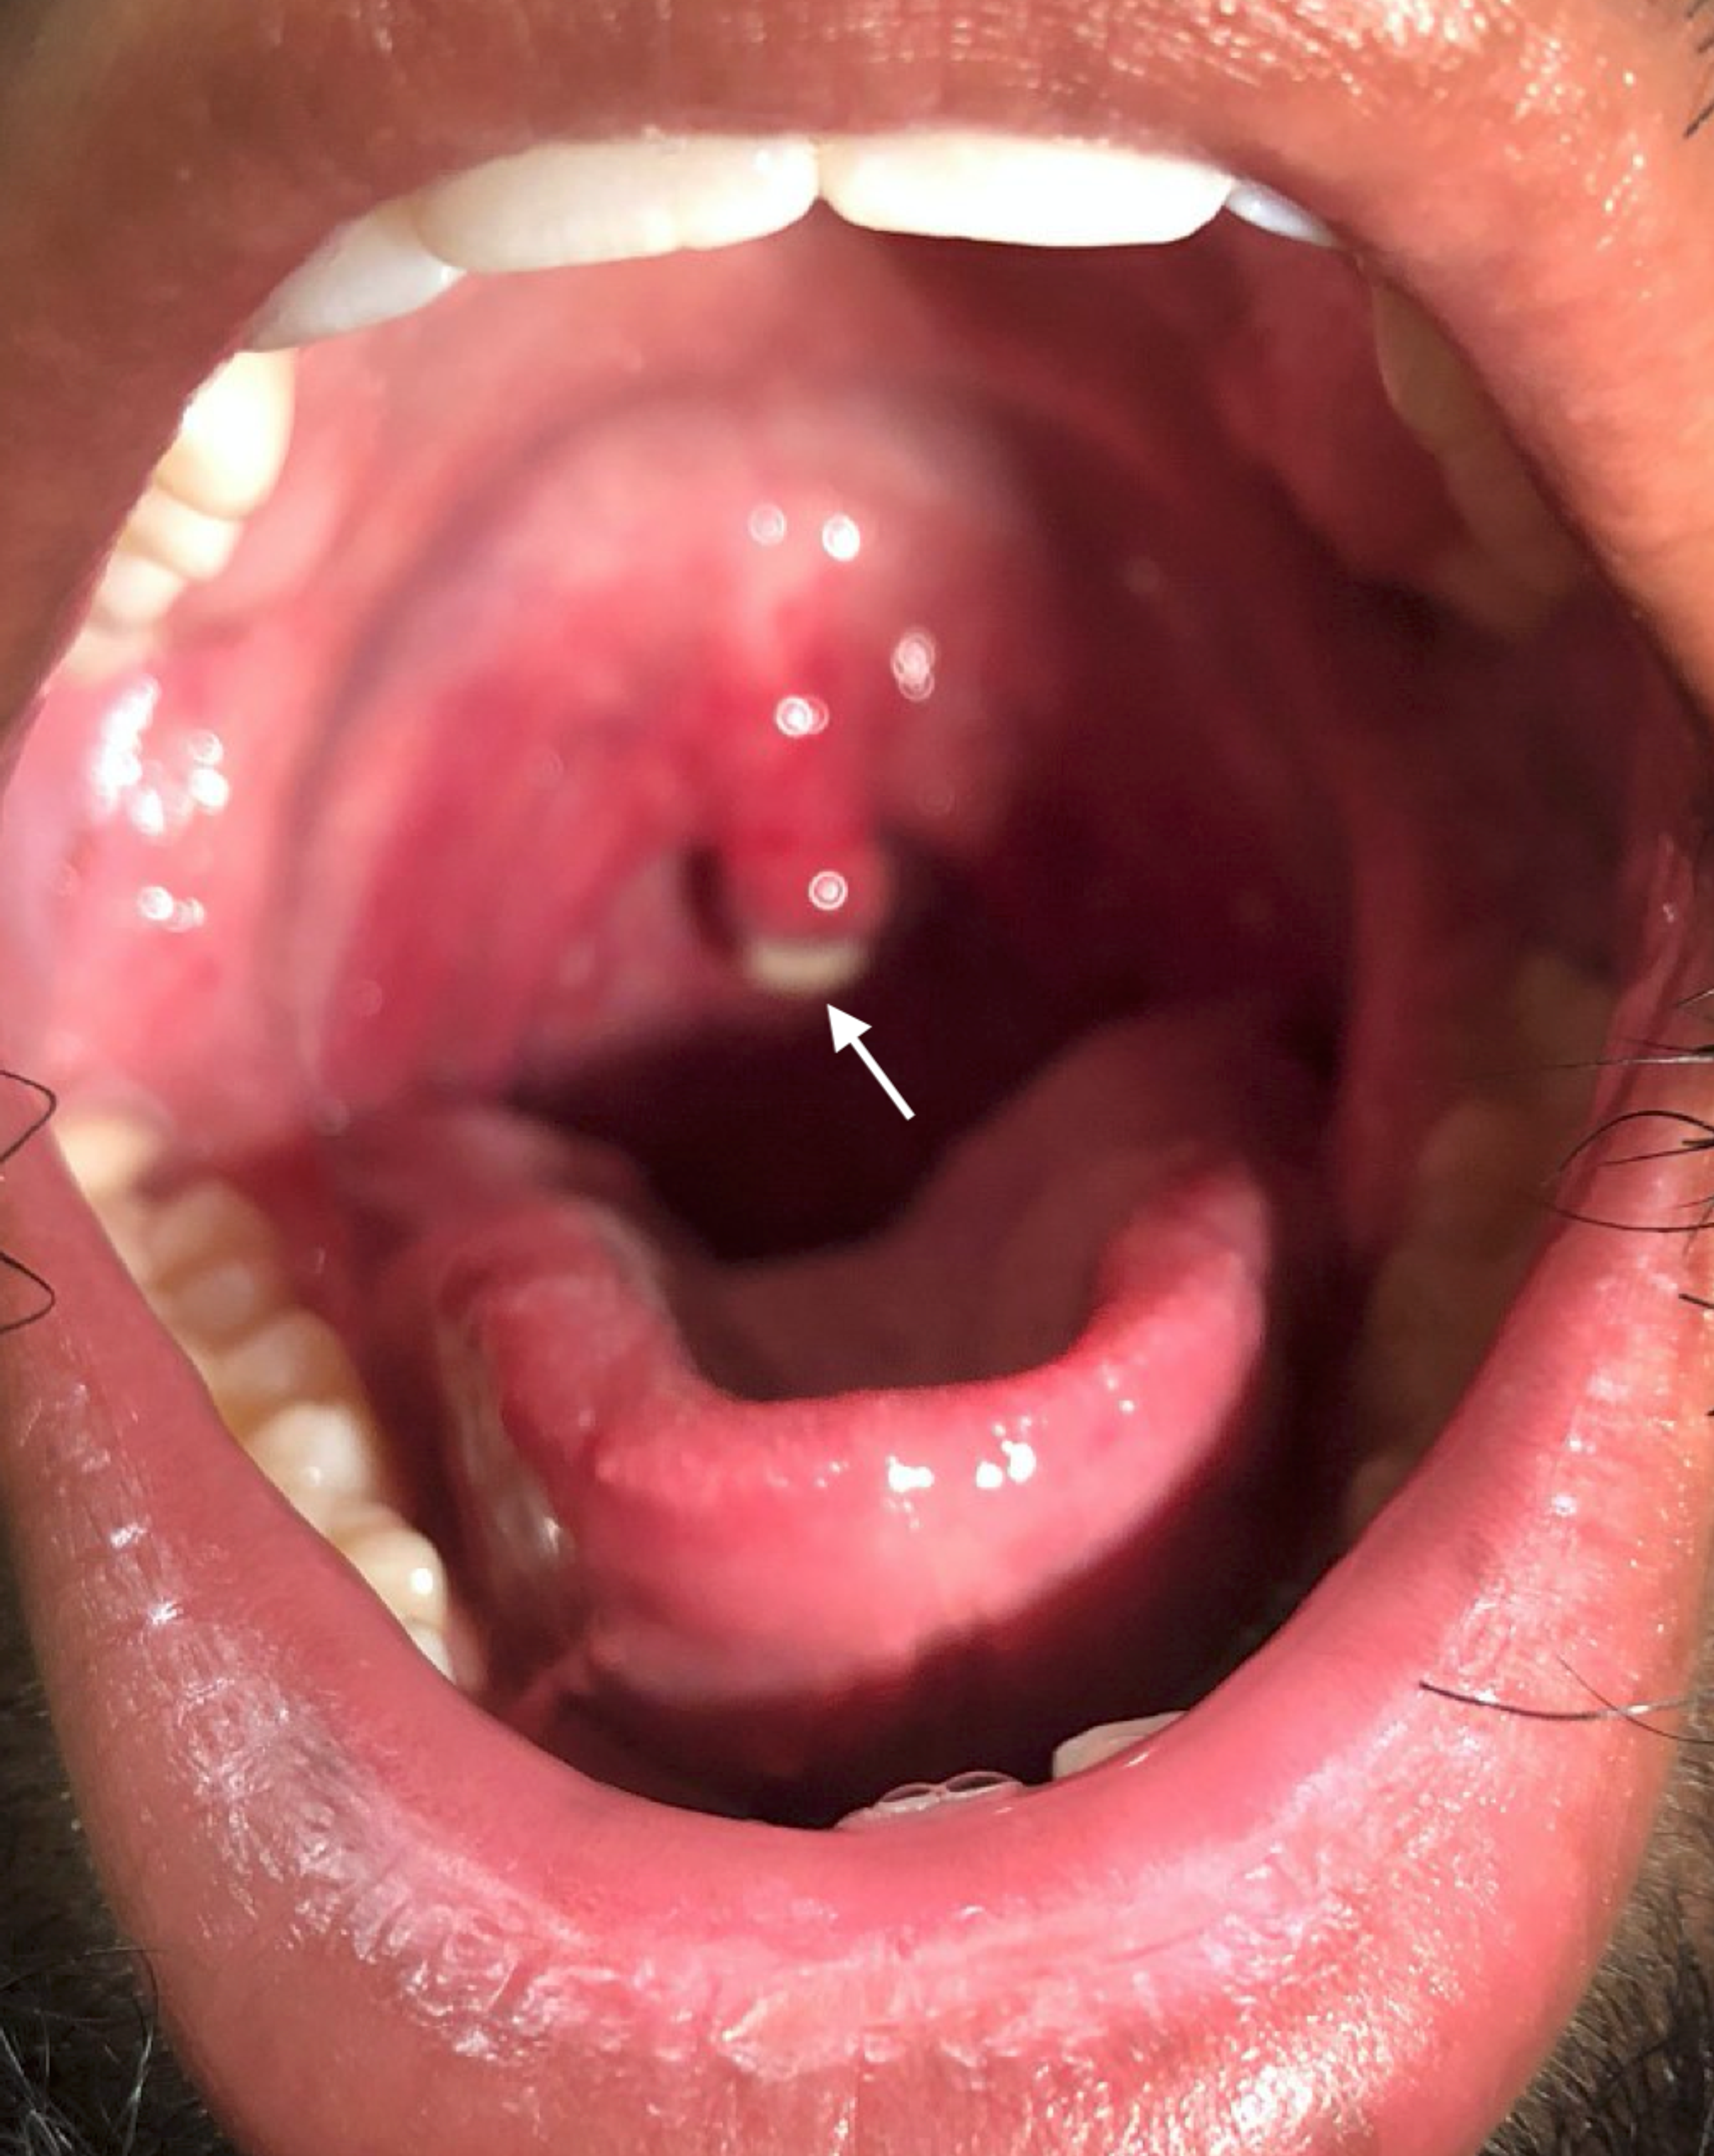 What causes canker sores on your uvula